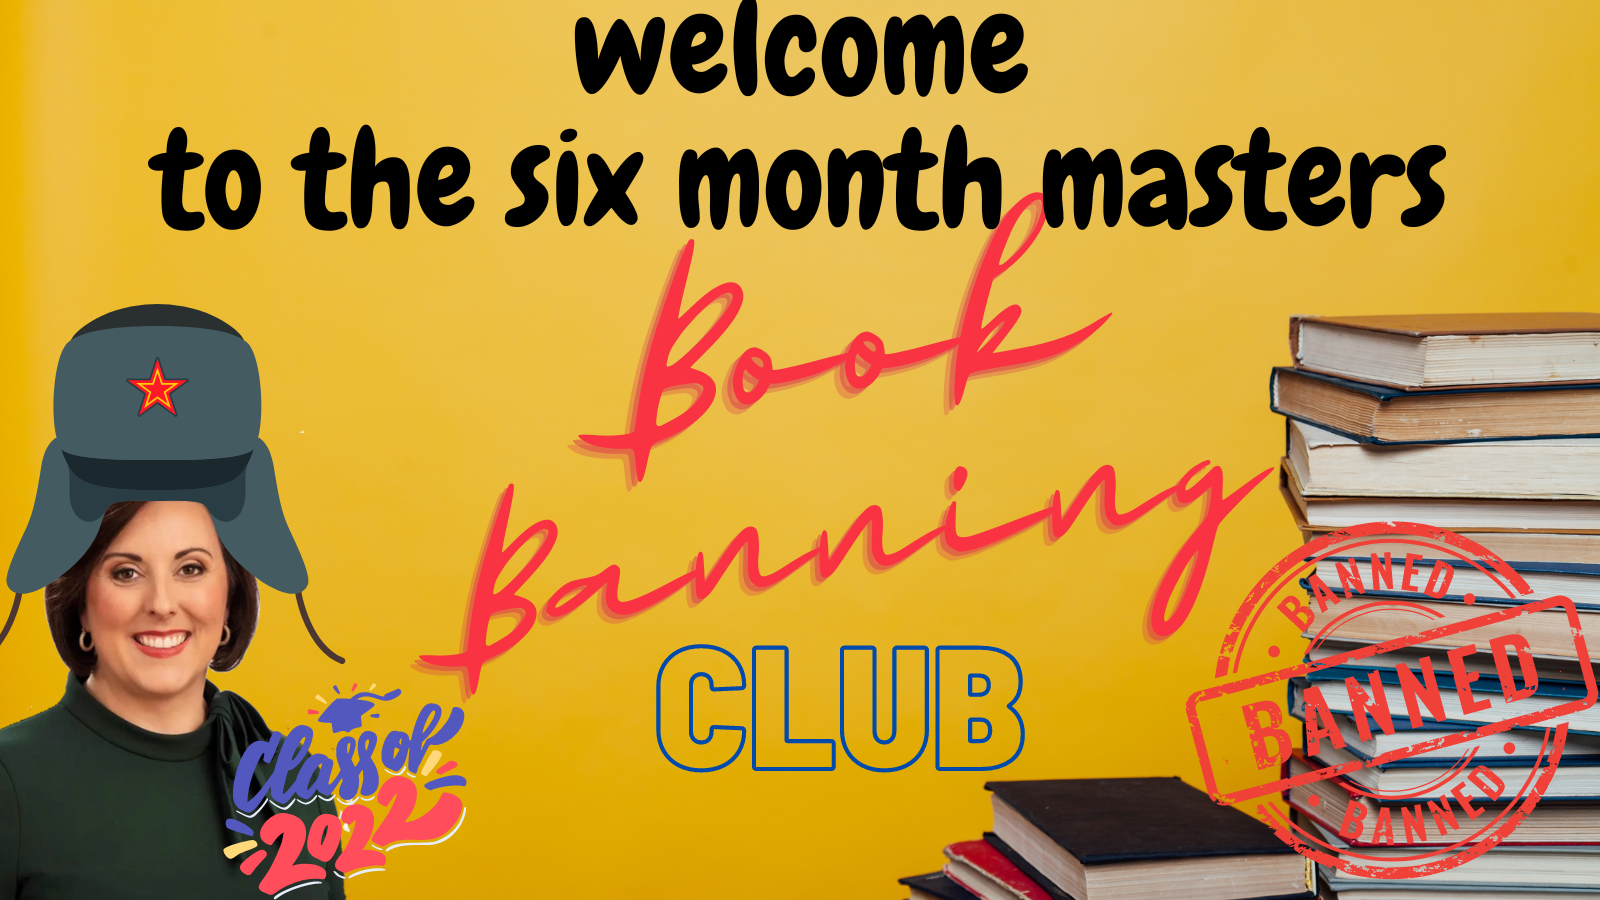 BOOK BANNING – SIX MONTH MASTERS BOOK BANNING CLUB